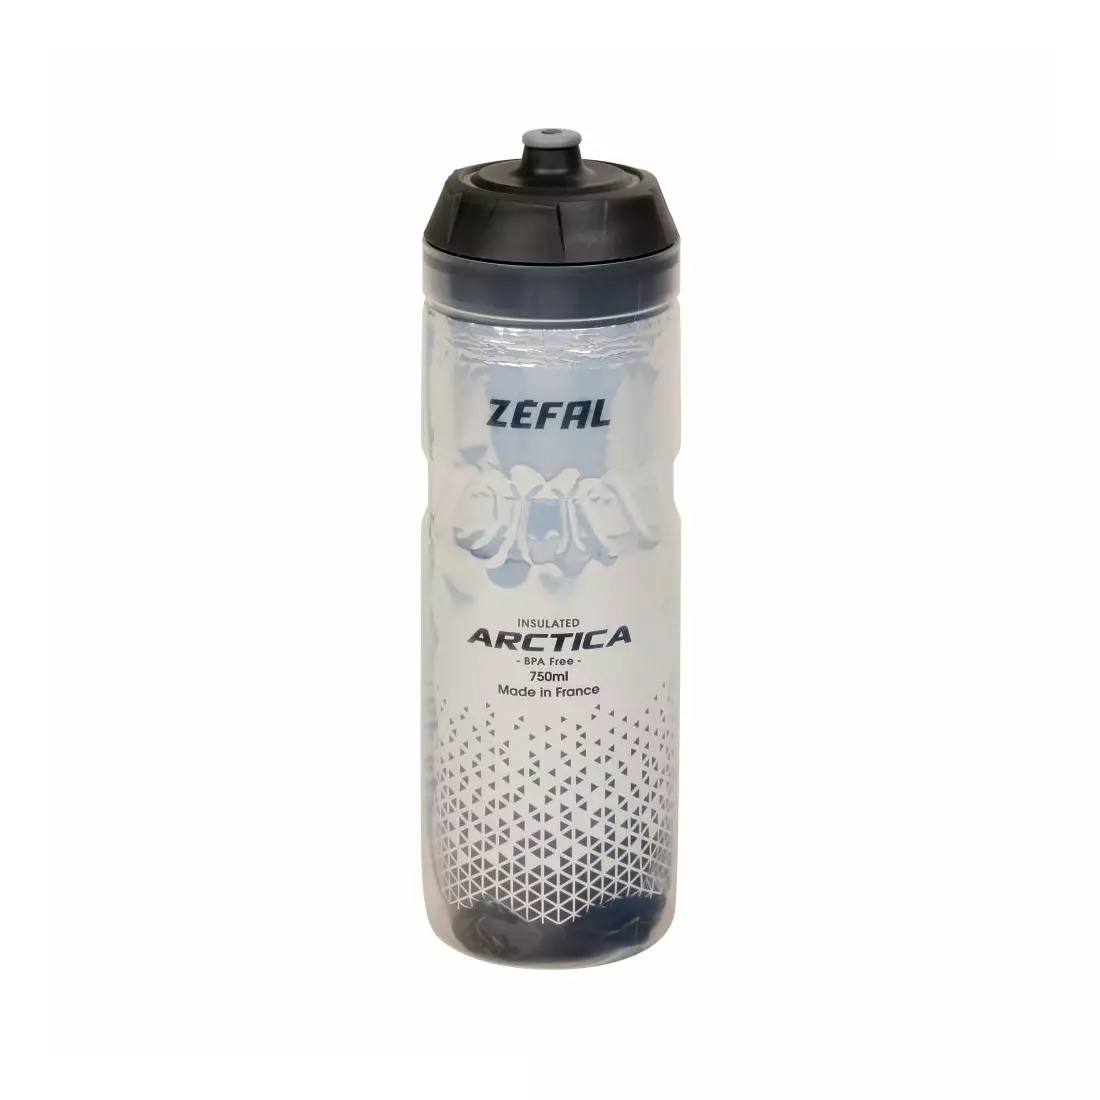 ZEFAL thermal bicycle water bottle ARCTICA 75 0,75L silver/black